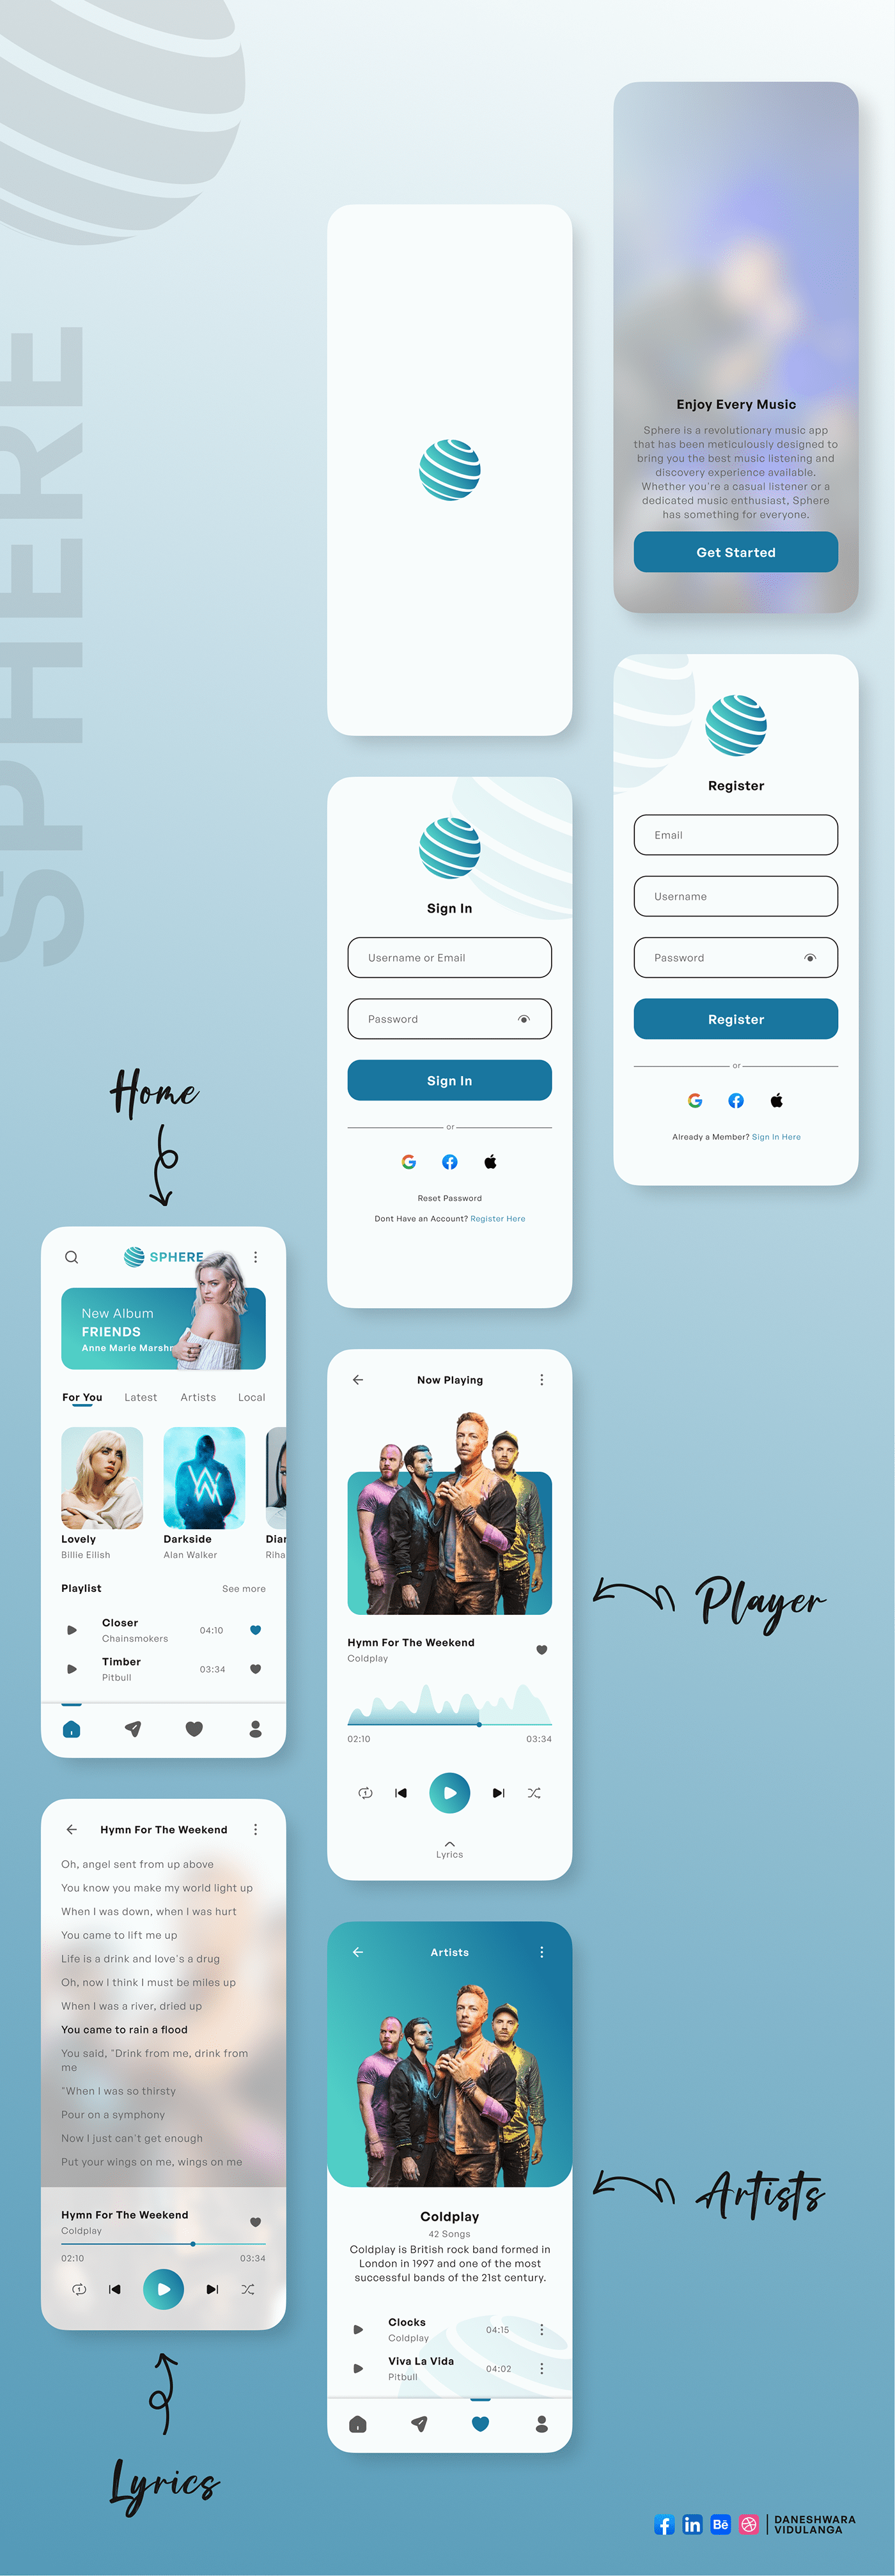 music Cover Art uidesign Case Study music app spotify Lyric video itunes Android App player design